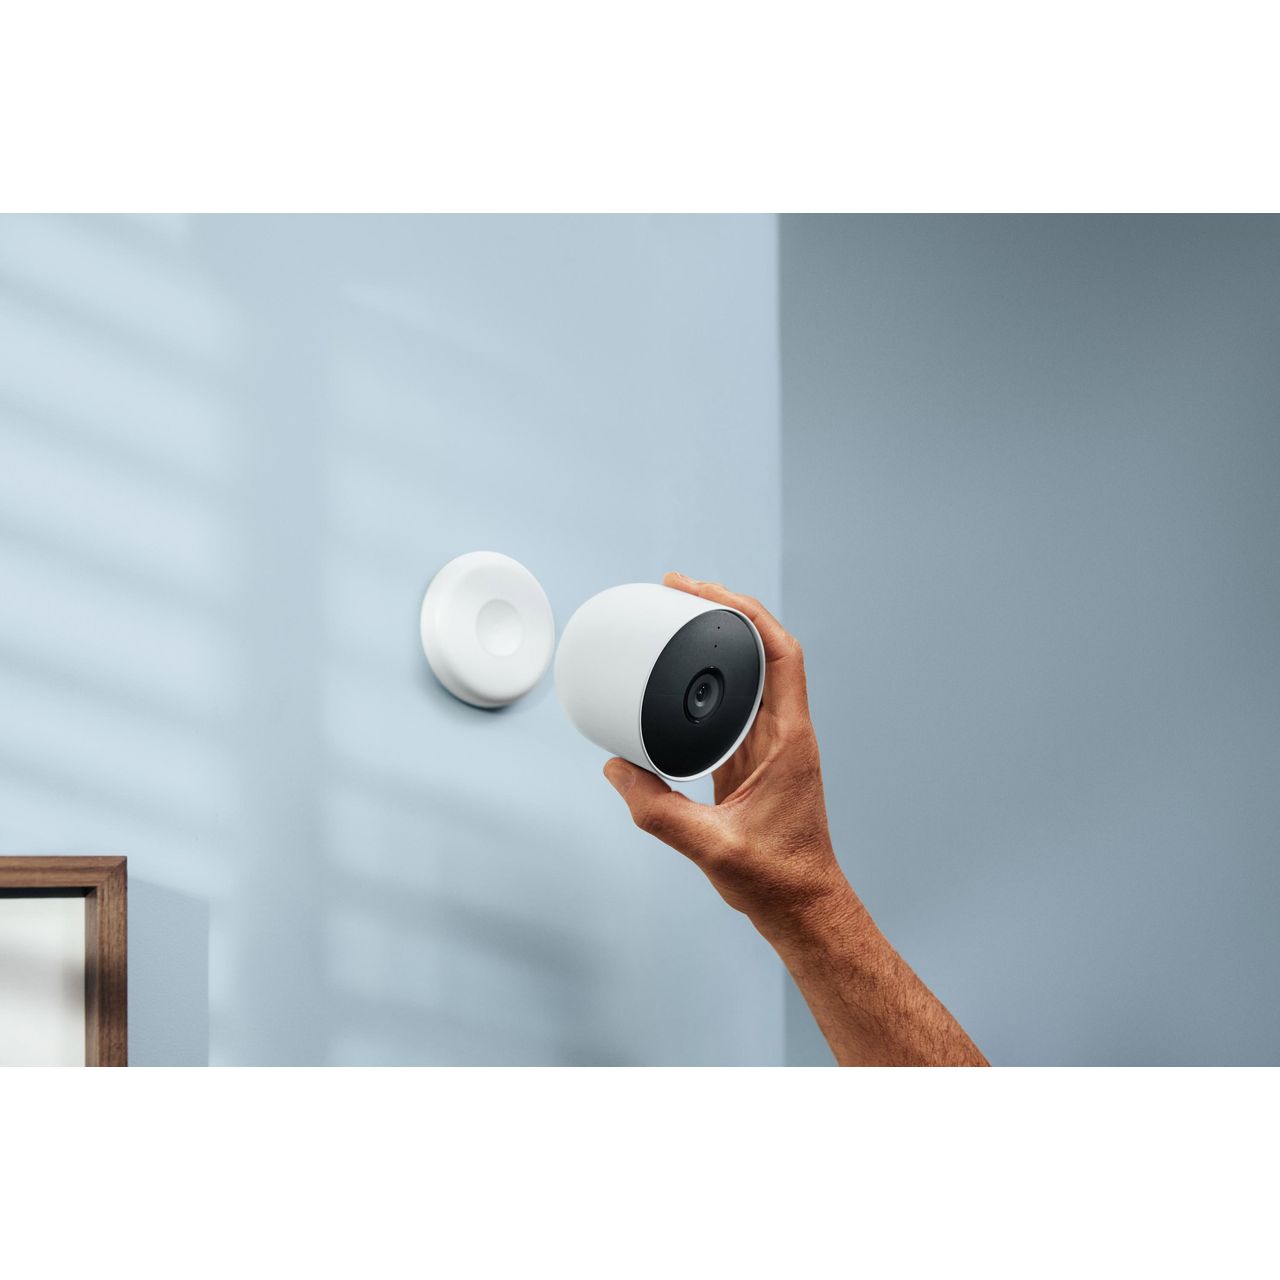 Google Nest Indoor & Outdoor Security Camera Wireless Full HD 1080p Smart  Home Security Camera - White